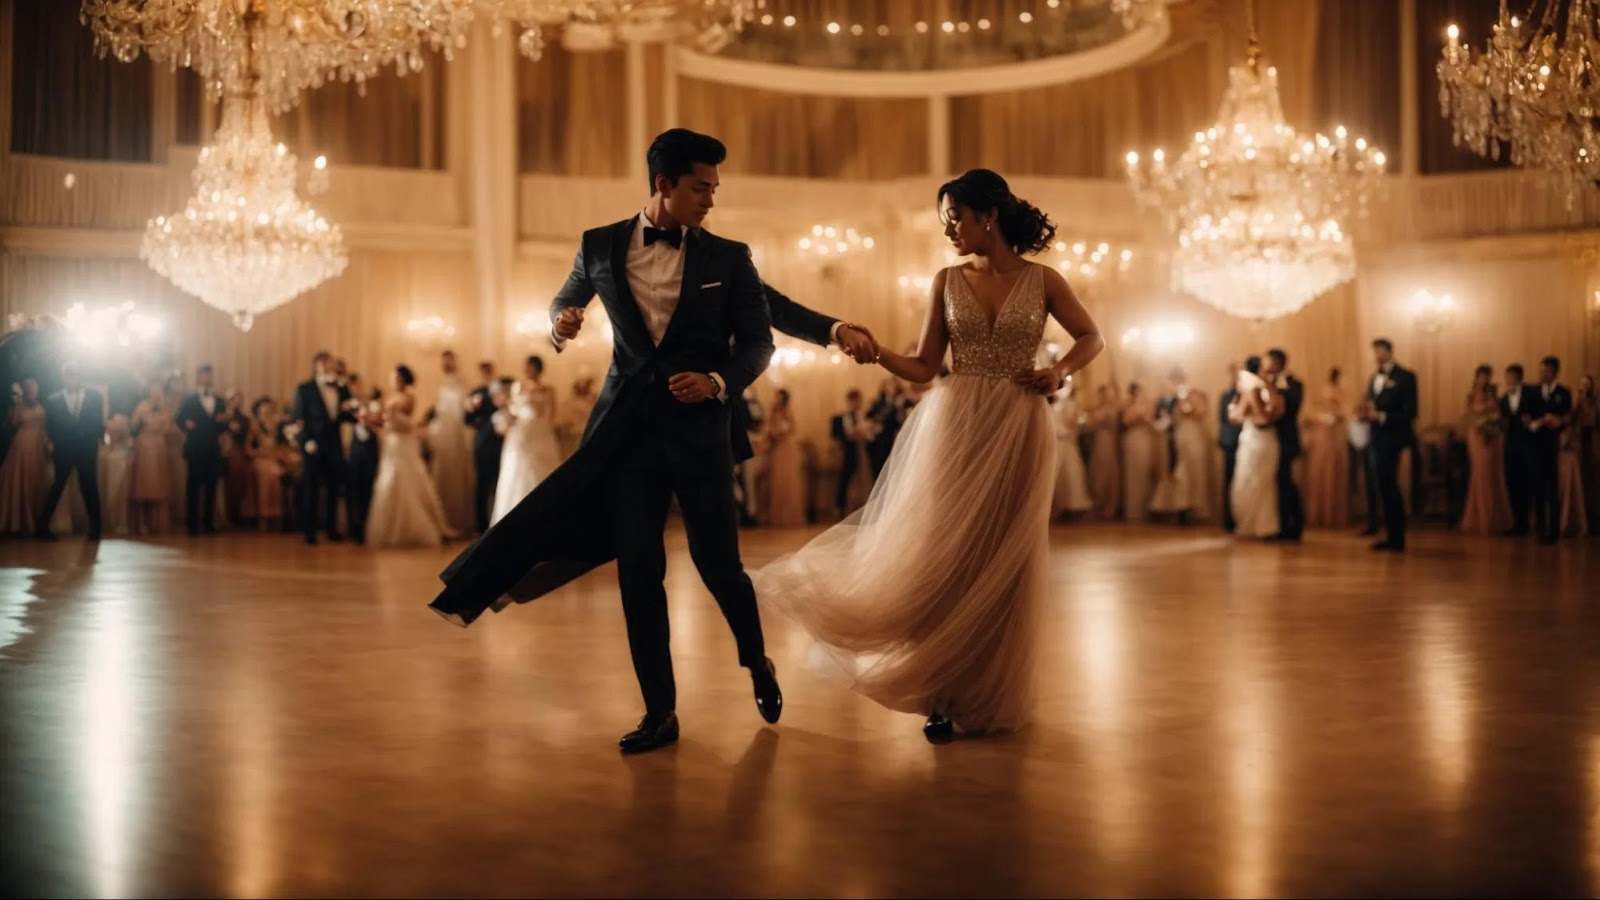 couples are gracefully gliding across a polished dance floor under the glow of chandeliers.